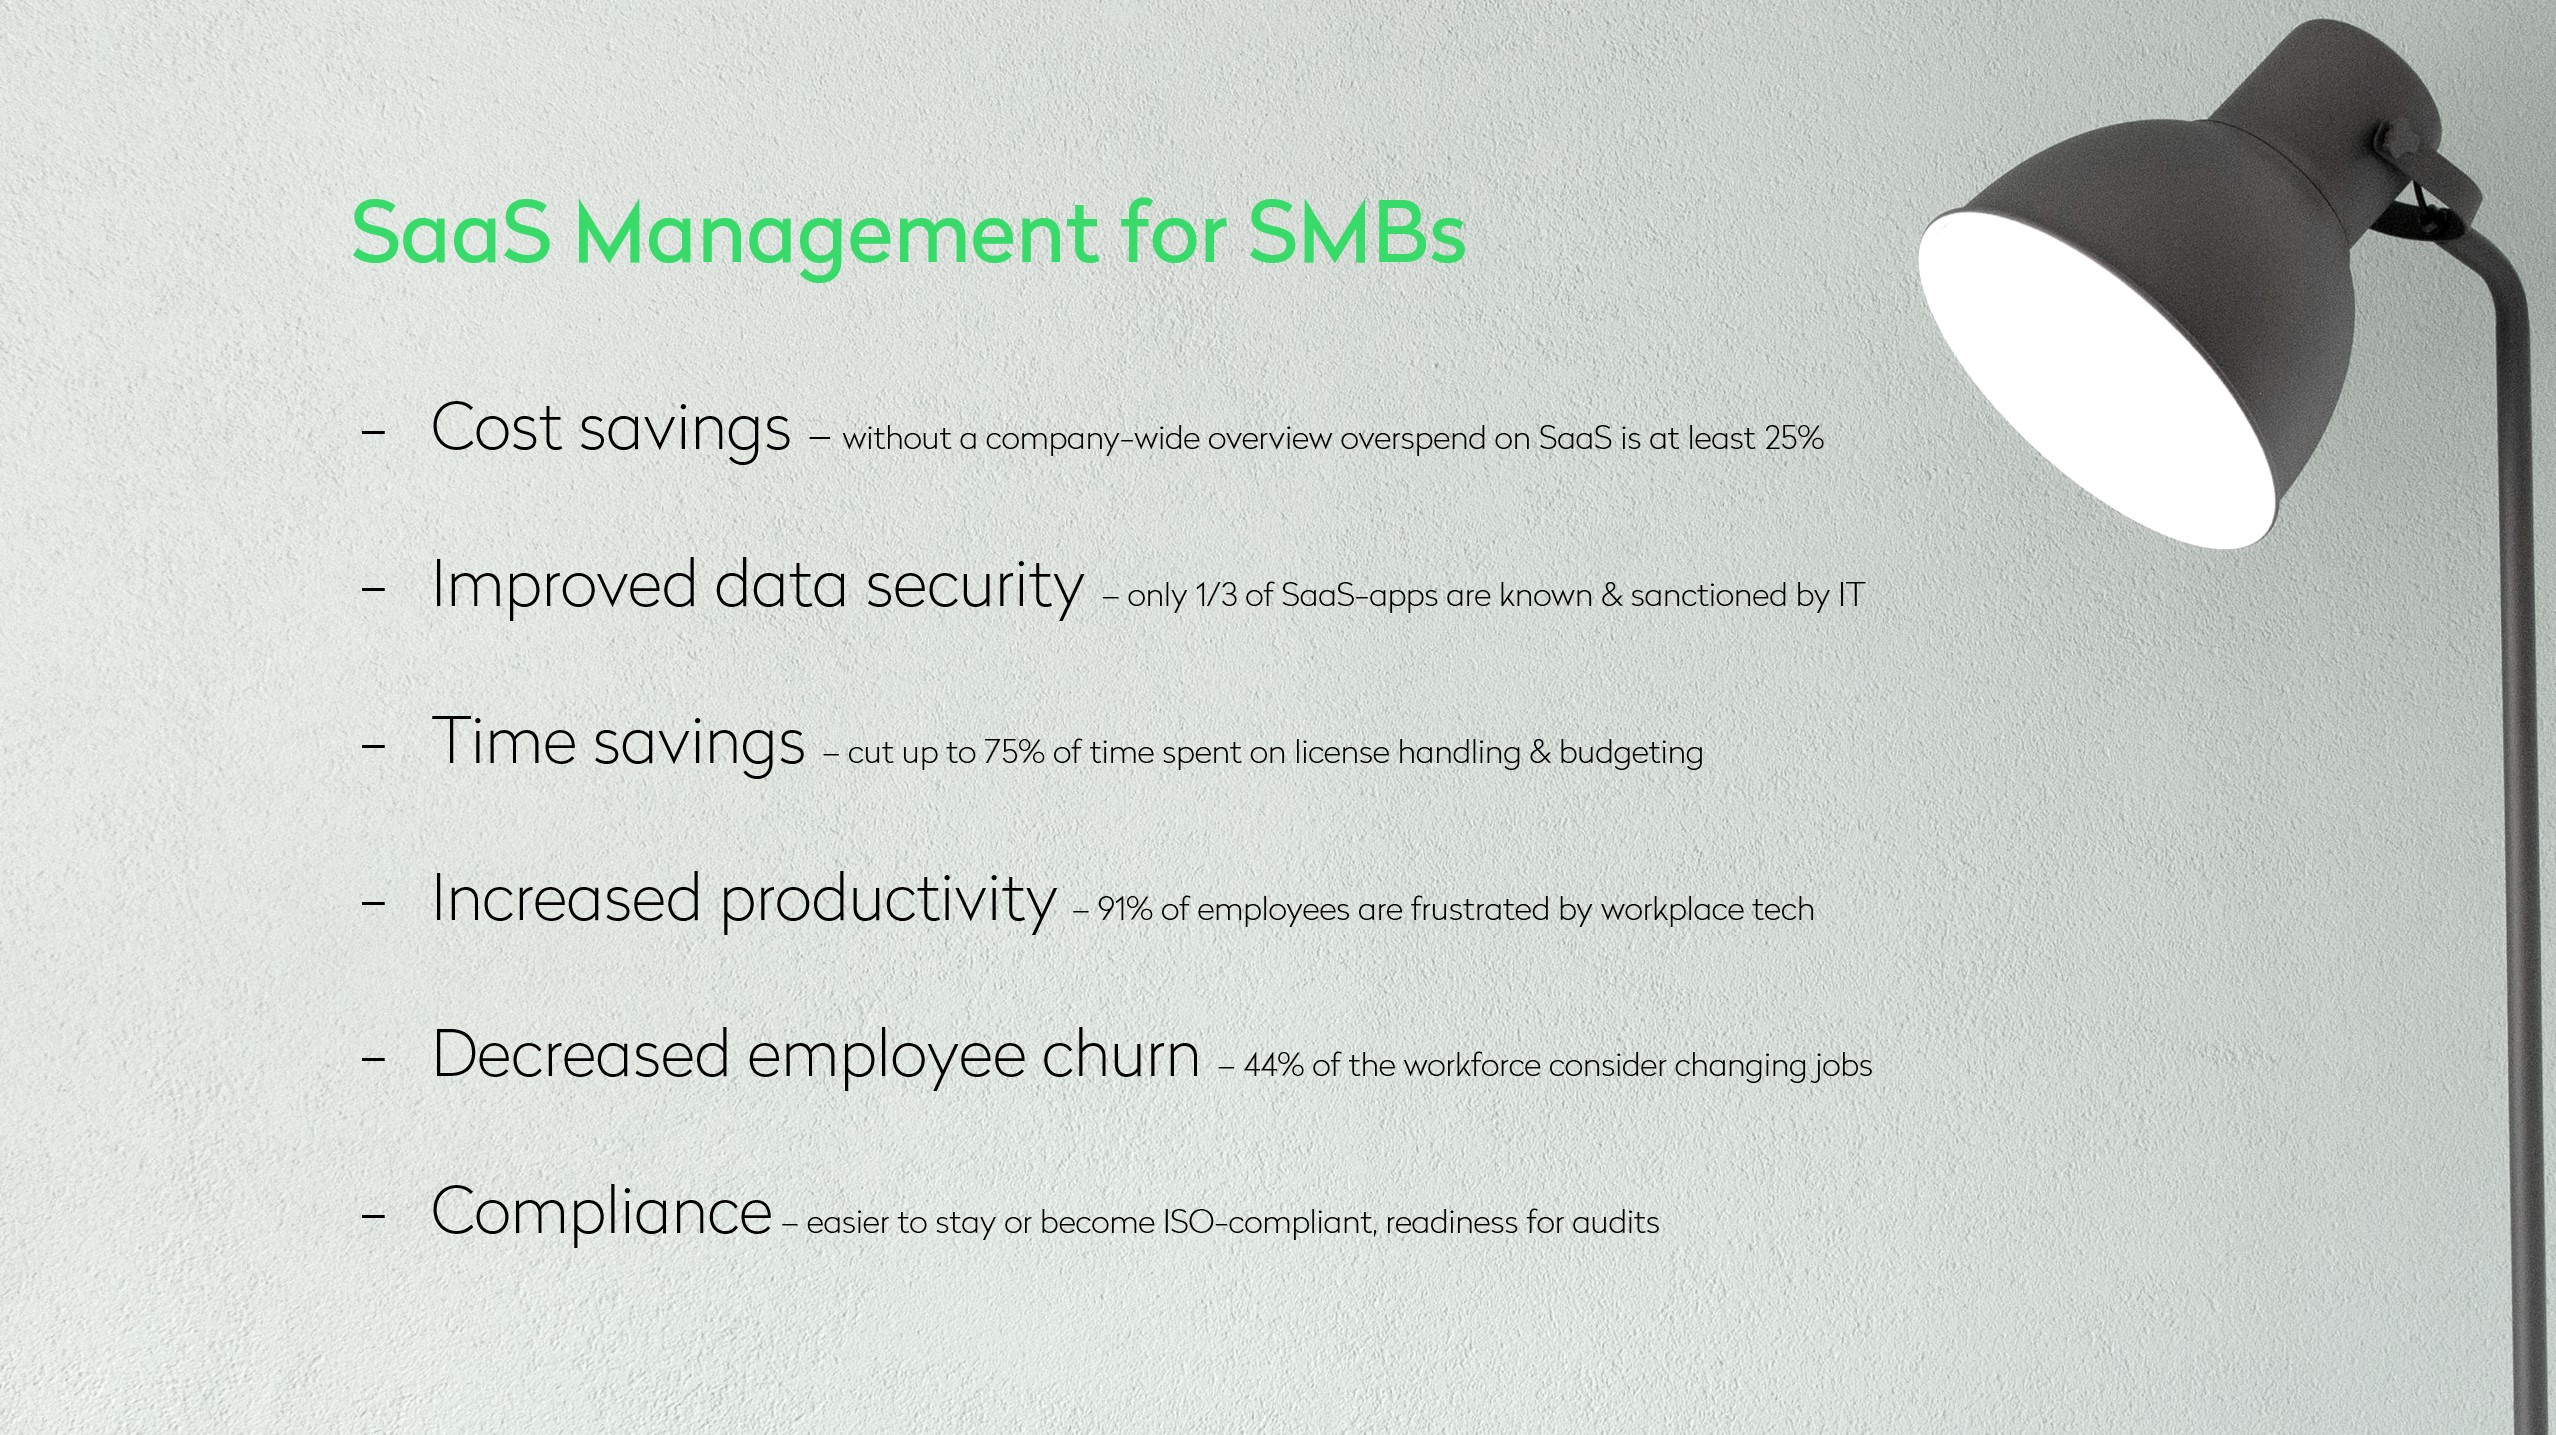 What there is to gain from proper SaaS management for small & medium sized comapanies